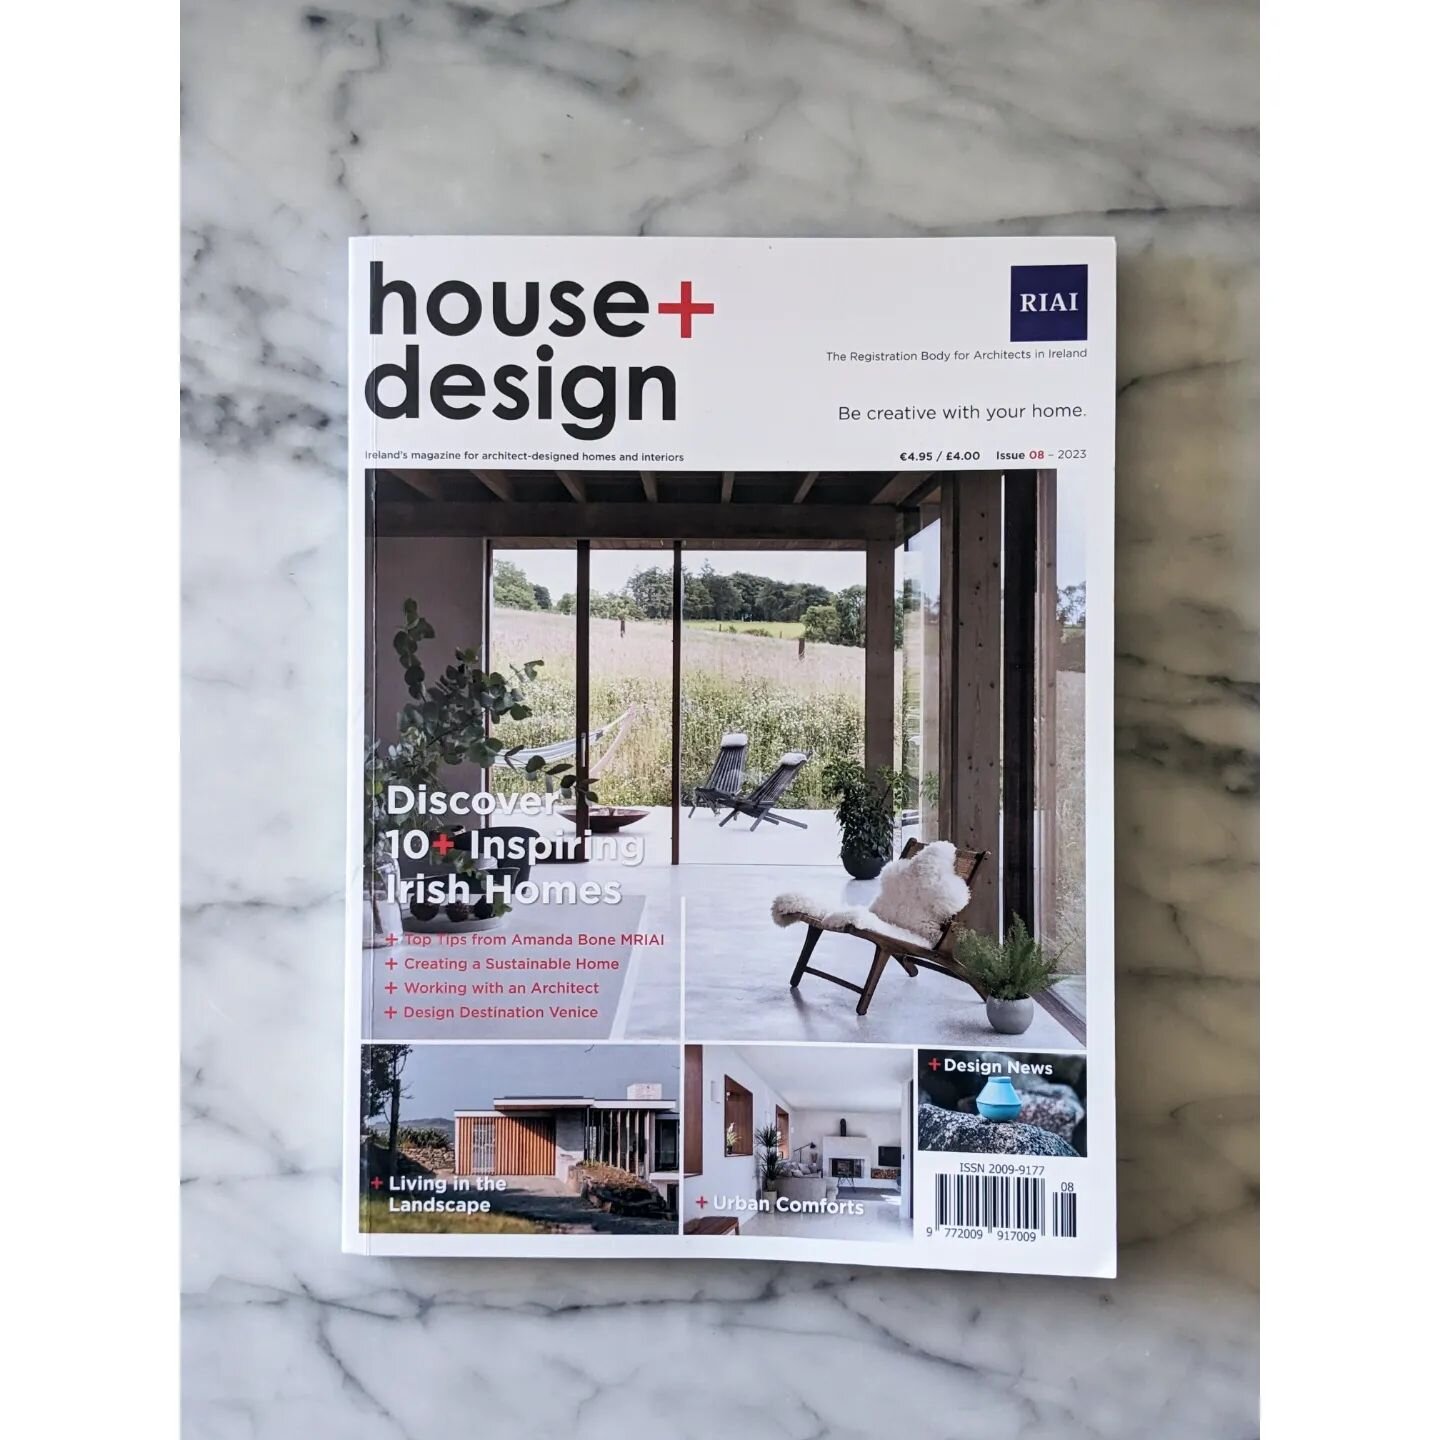 house + design, delighted to have our project in Bray feature in this year's house + design magazine published by the RIAI. This project involved an extension to and complete refurbishment of a pair of coach houses on a mews lane in Bray Co. Wicklow.